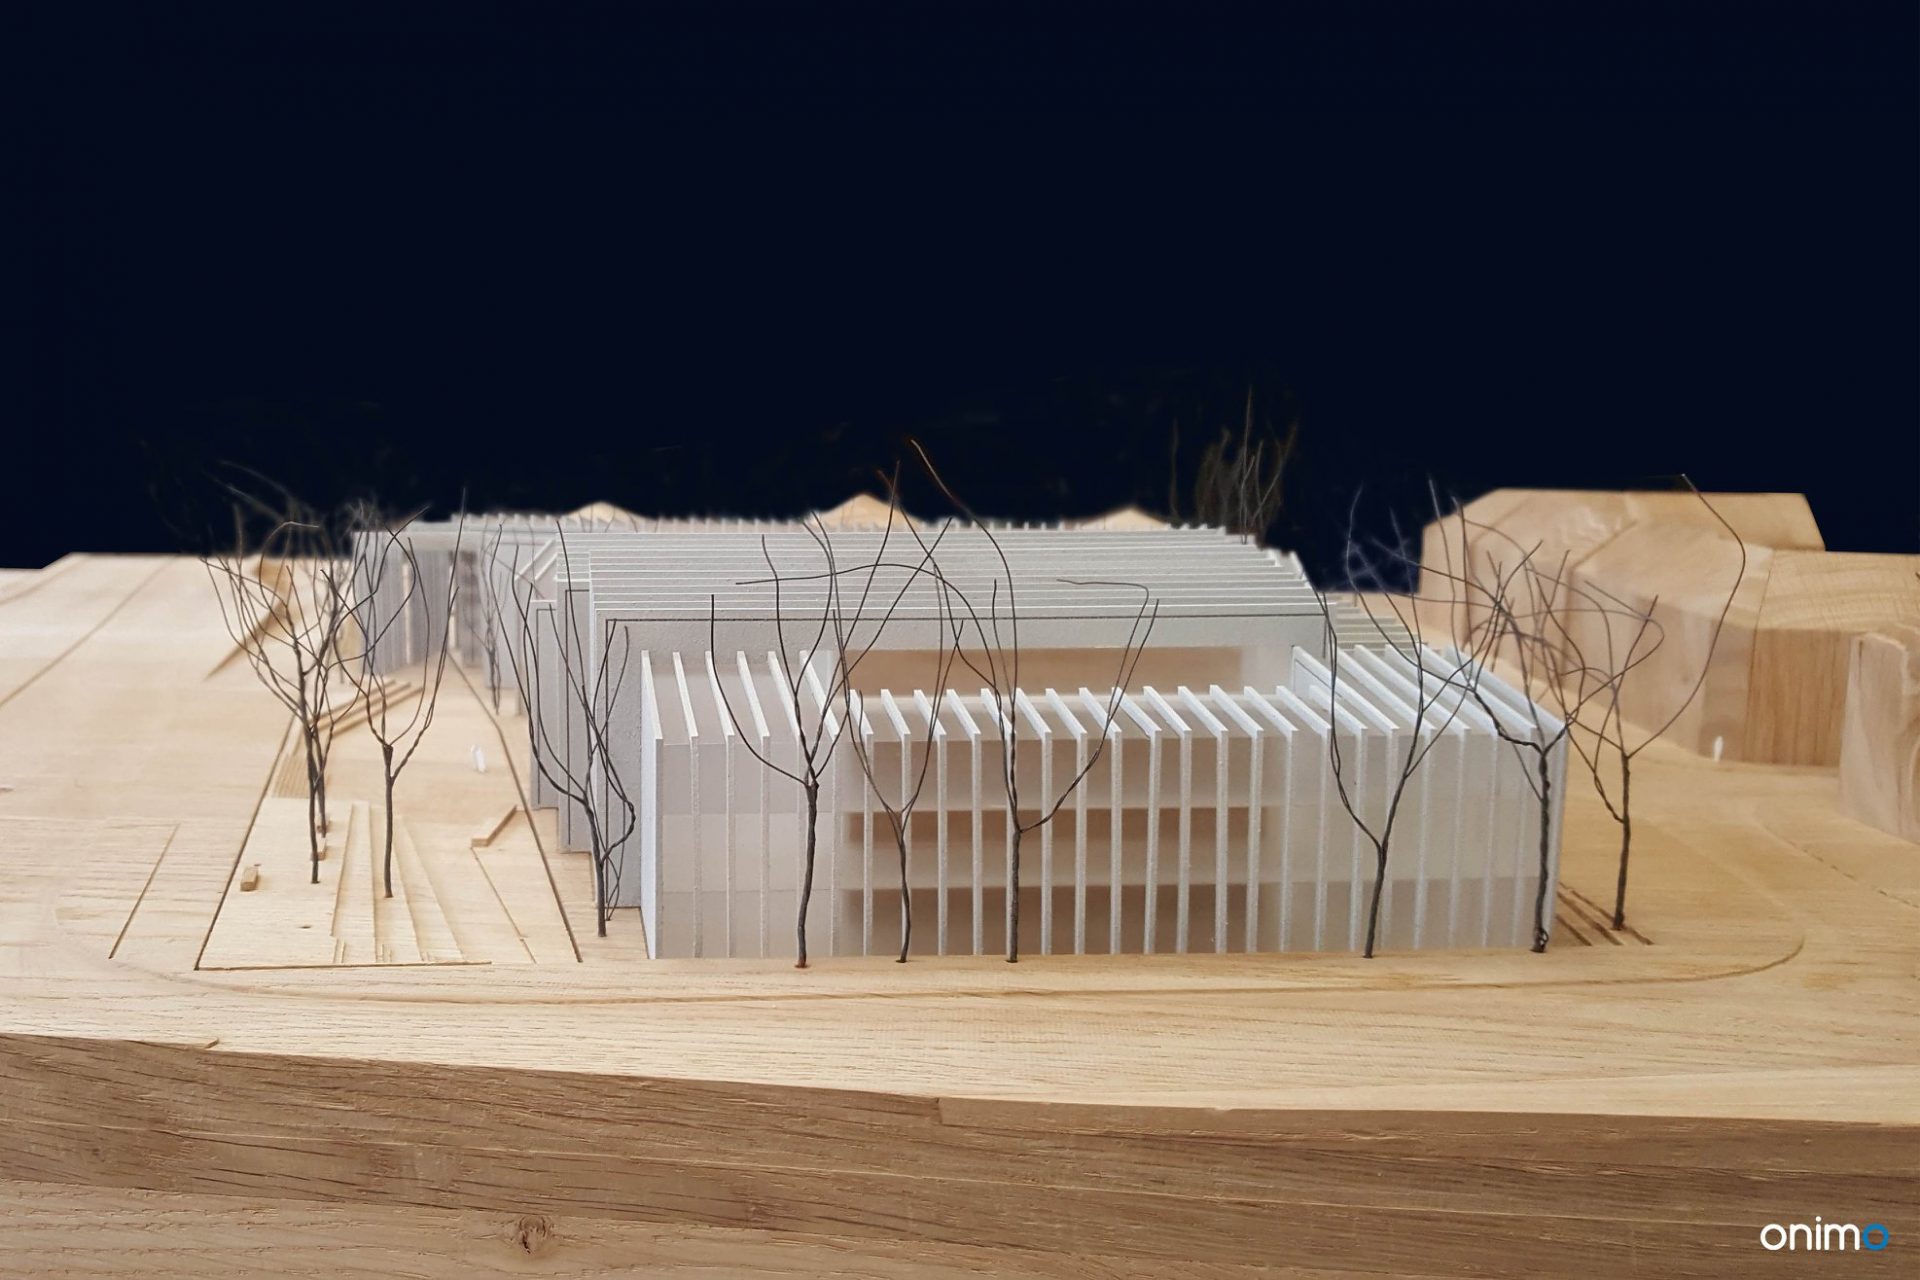 Didactic building of the University of Warsaw | Atelier Tektura, ONIMO, best architectural models, best building models